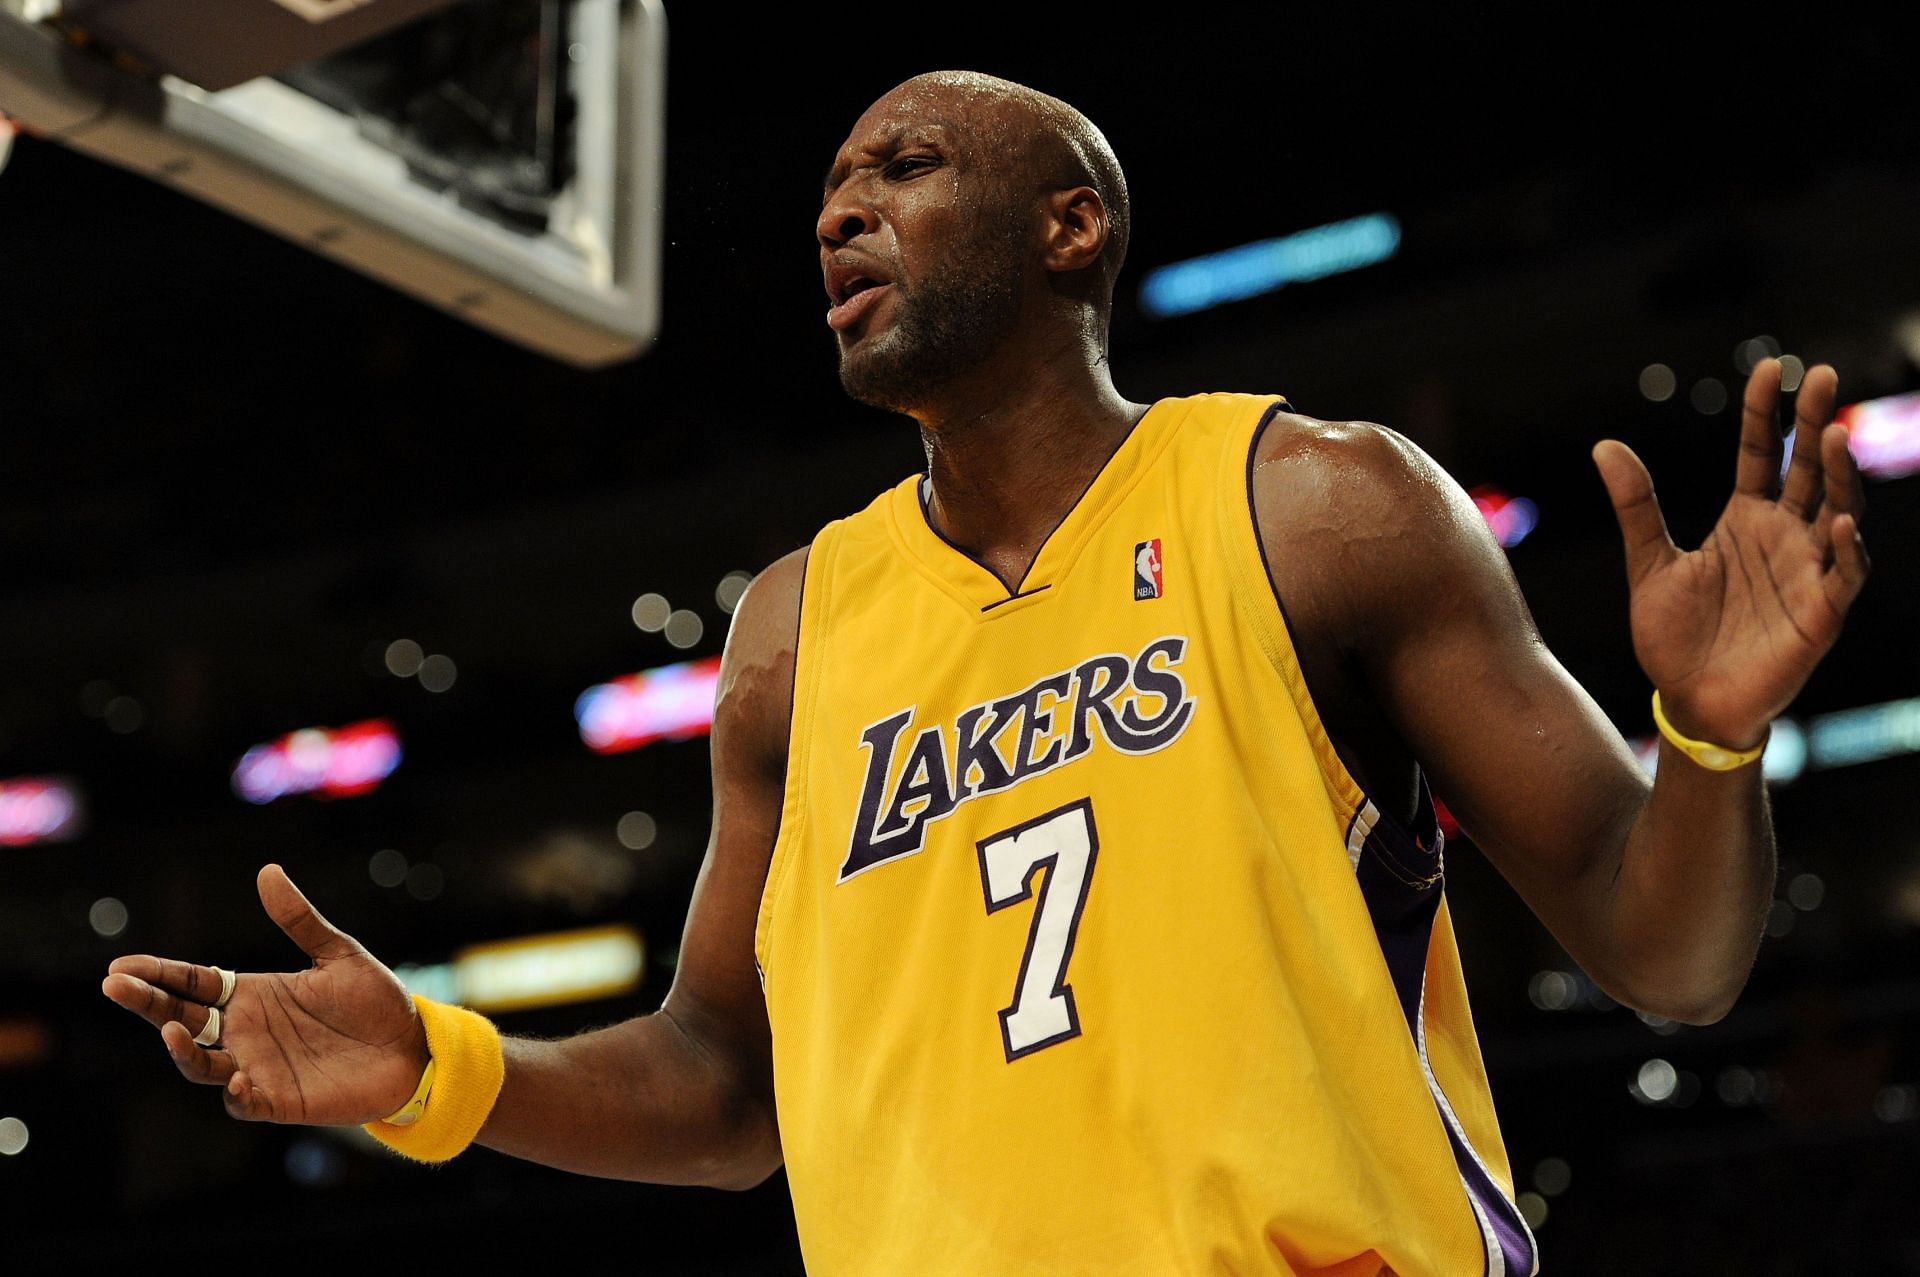 Odom spent 14 years playing in the NBA, winning two rings (Image via Getty Images)